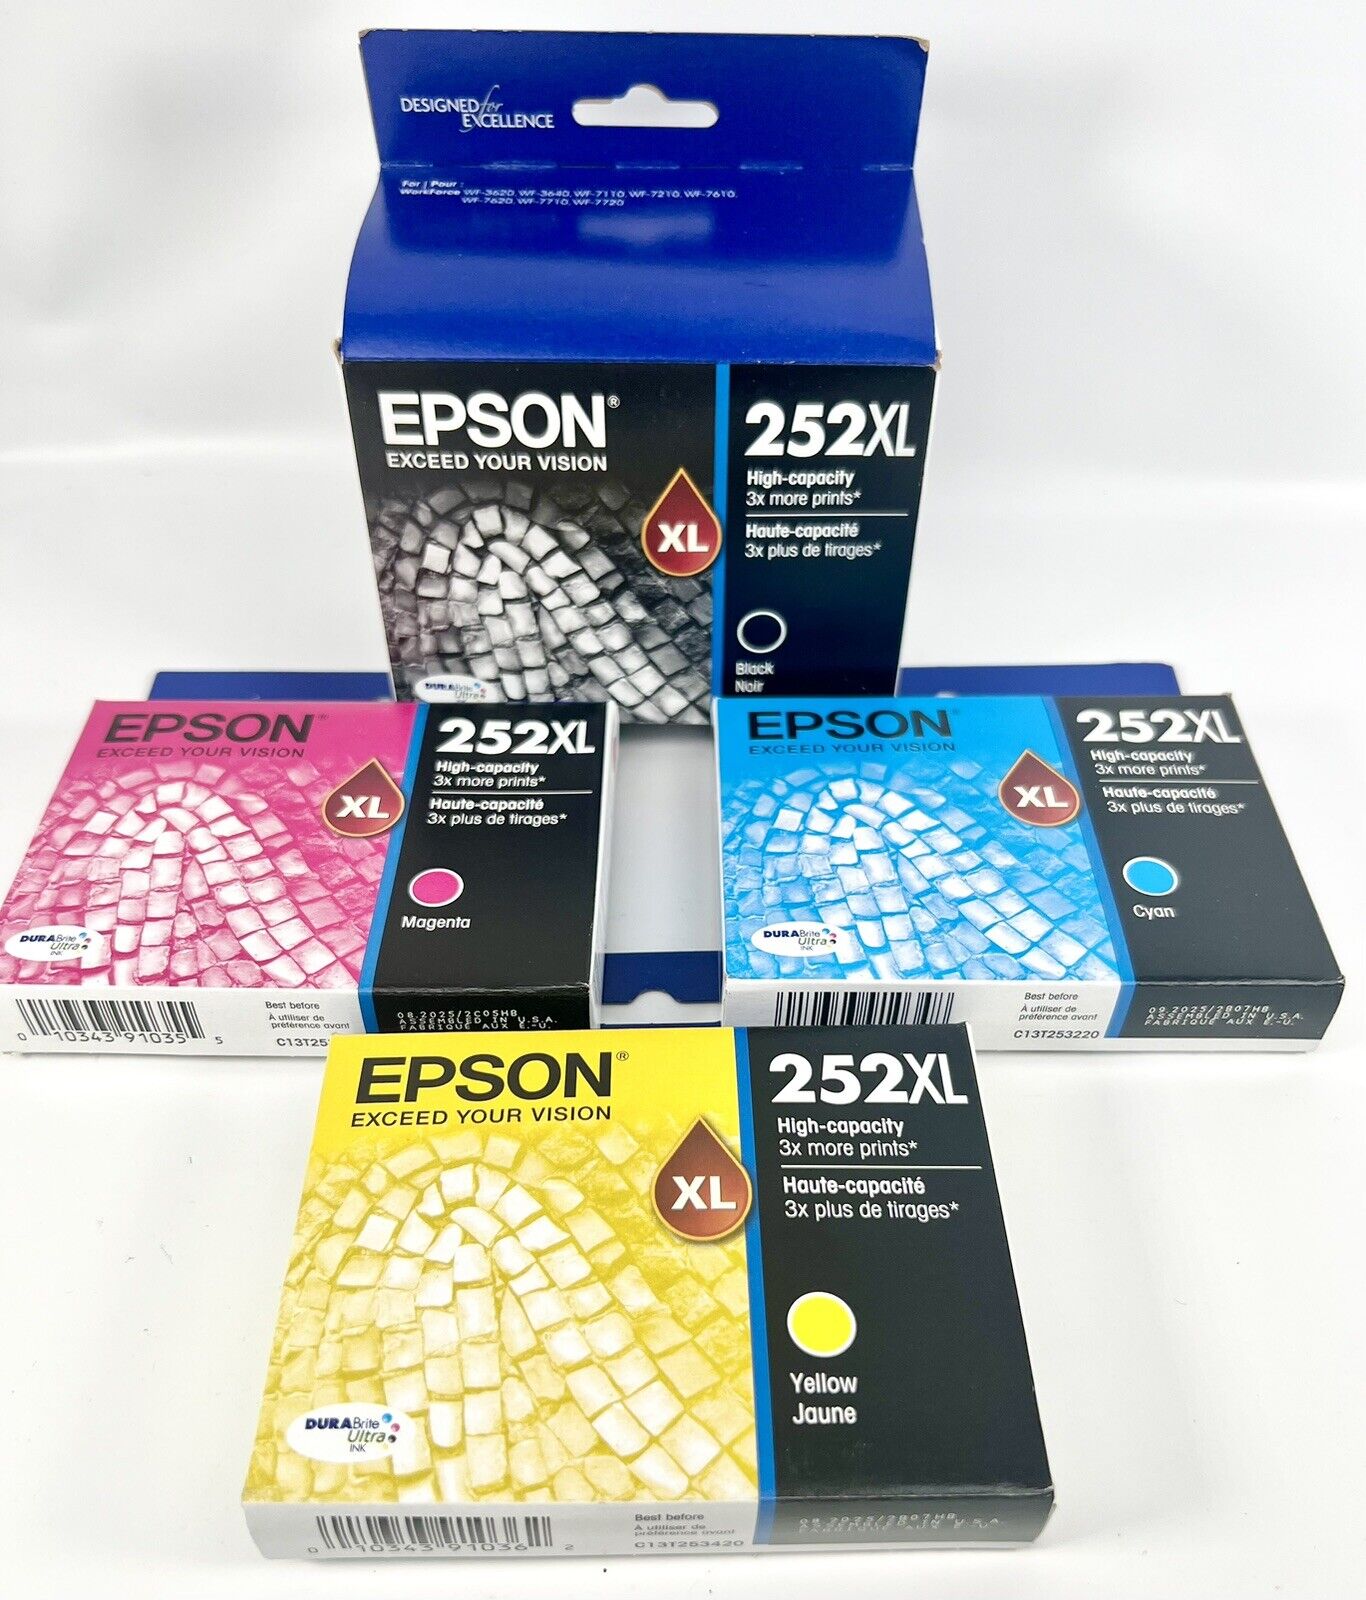 Genuine Epson 252XL Ink Cartridges Black and Tricolor CMYK Lot of 4 All XL NEW